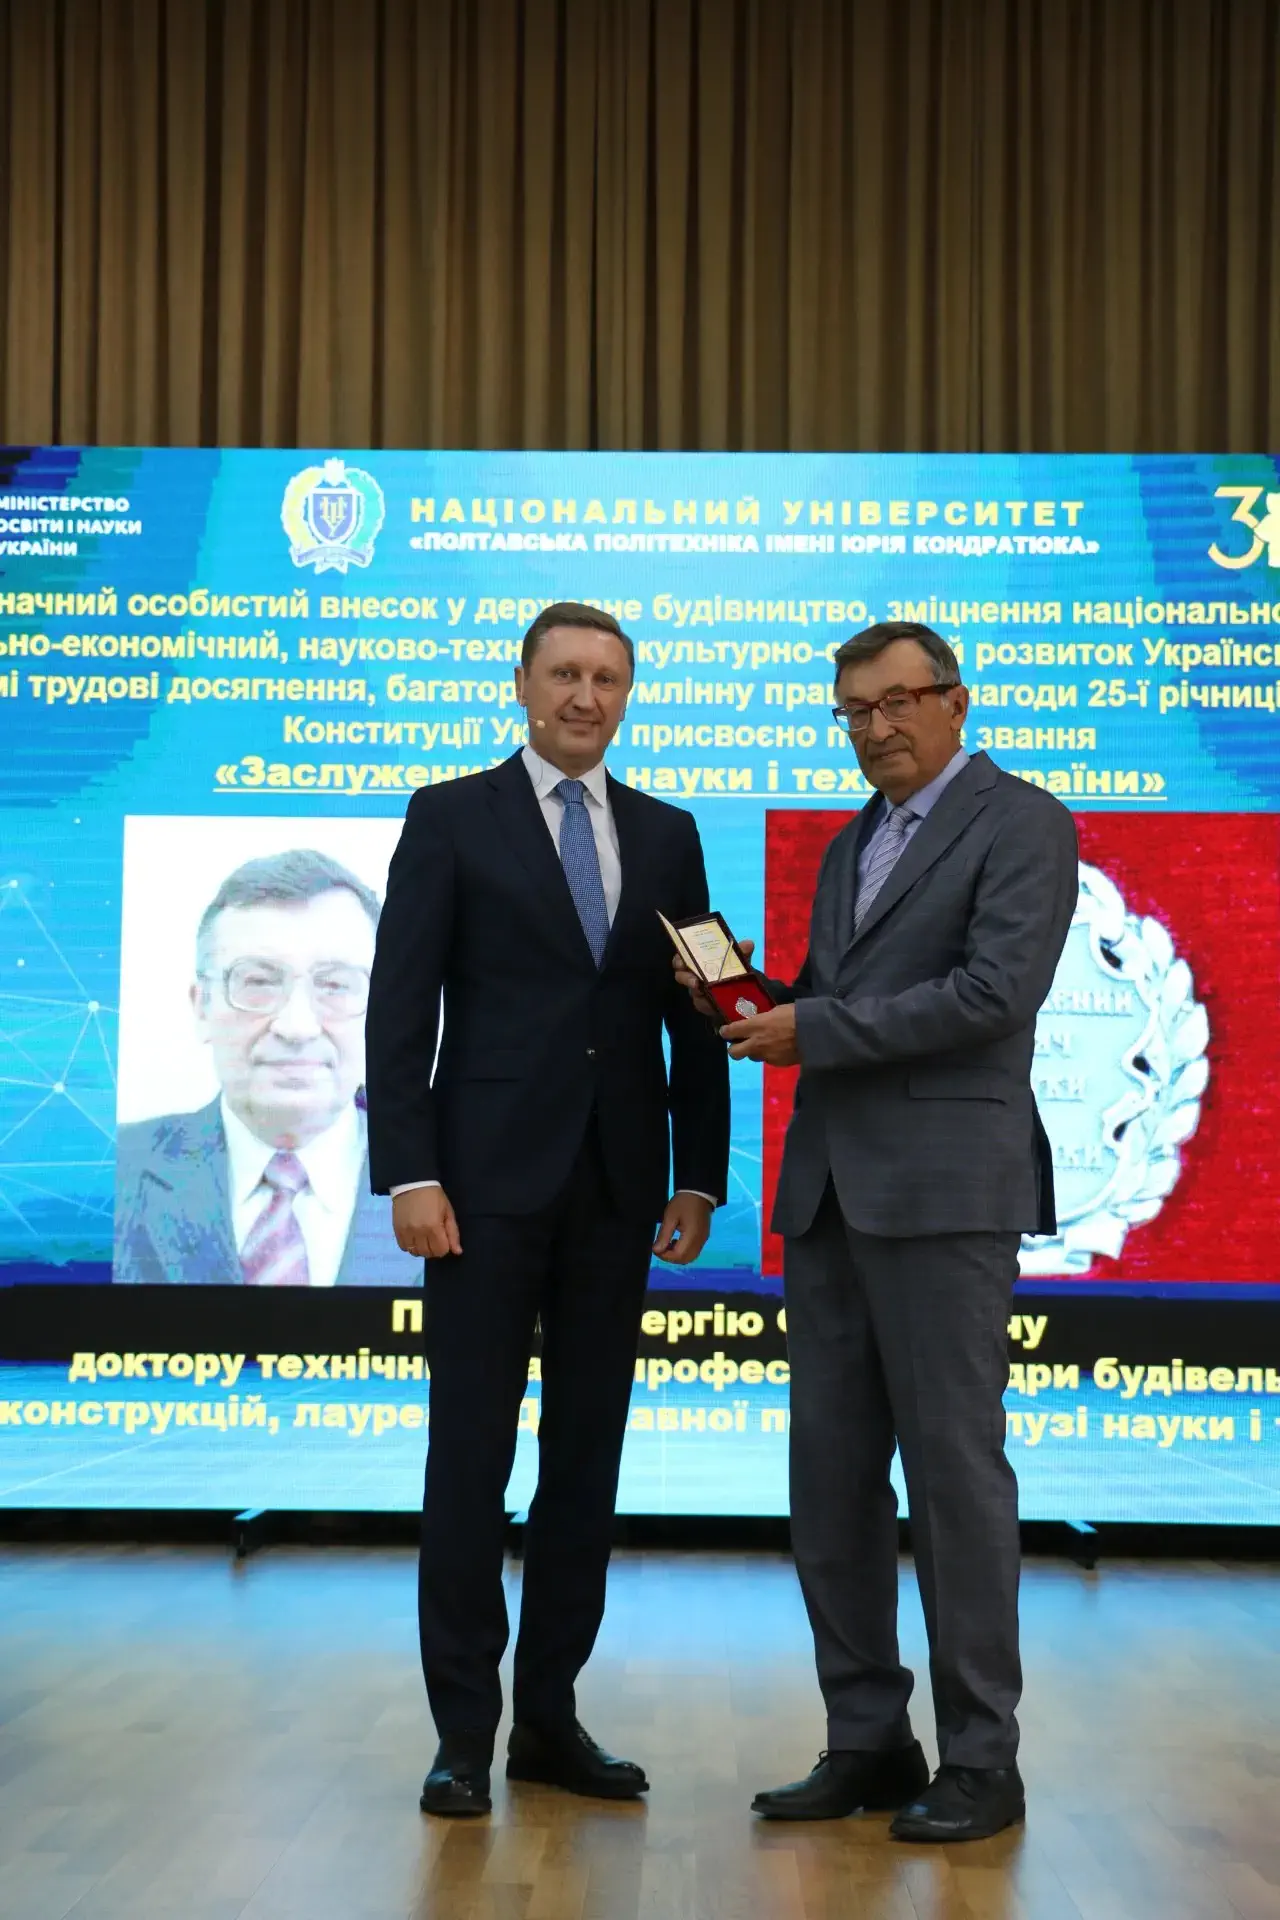 Polytechnic scientist is presented with a presidential award